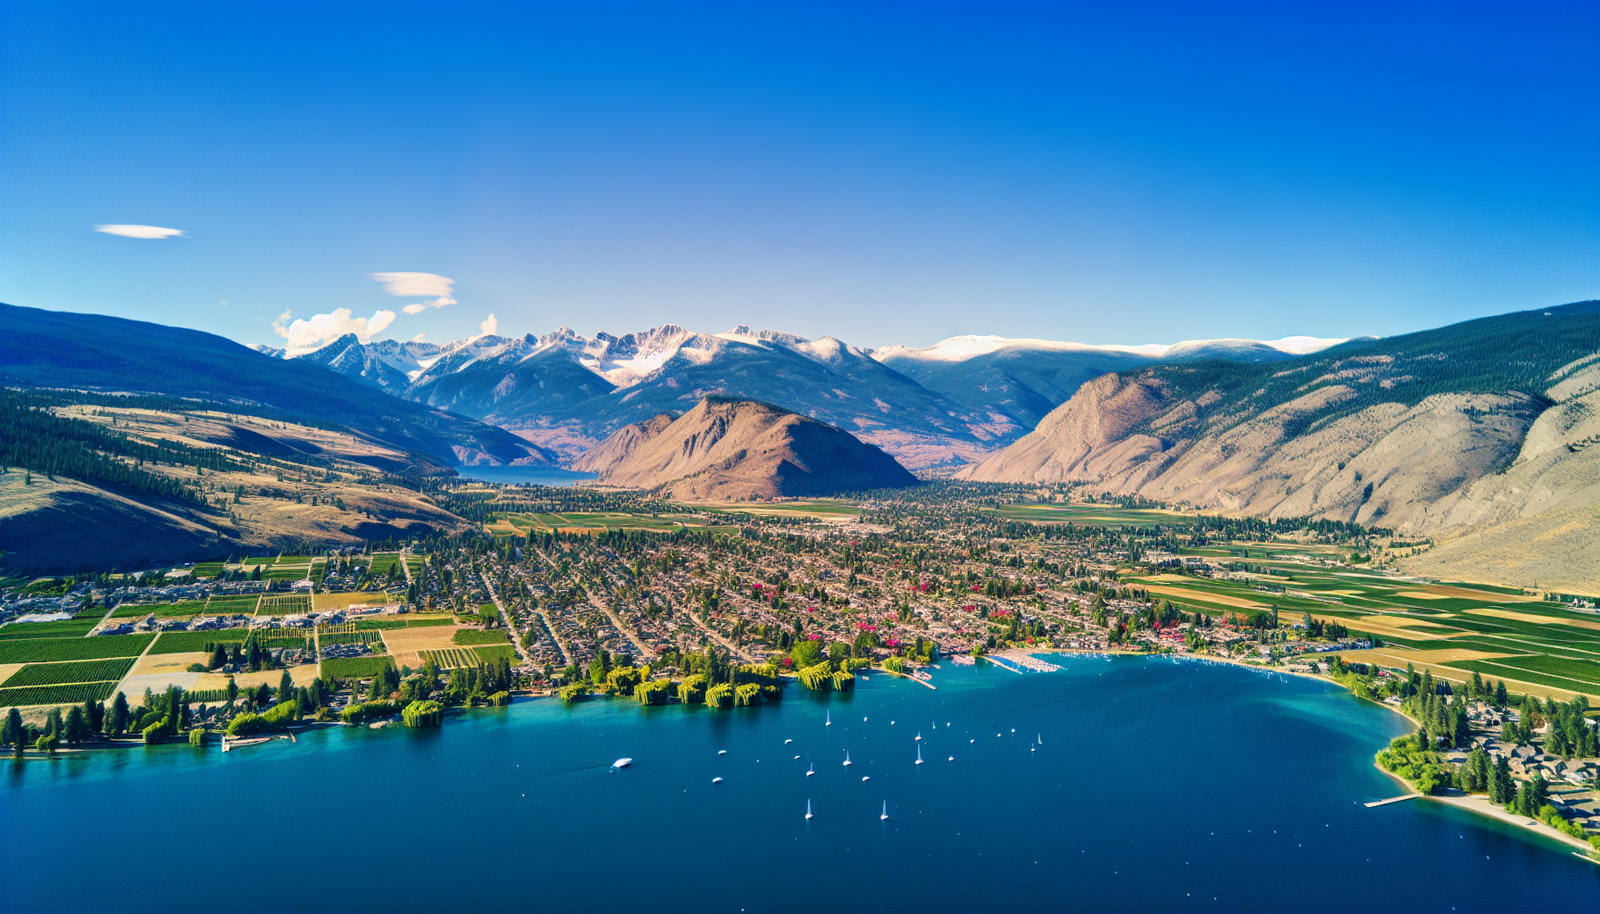 Aerial view of Osoyoos showing the surrounding mountains and Osoyoos Lake